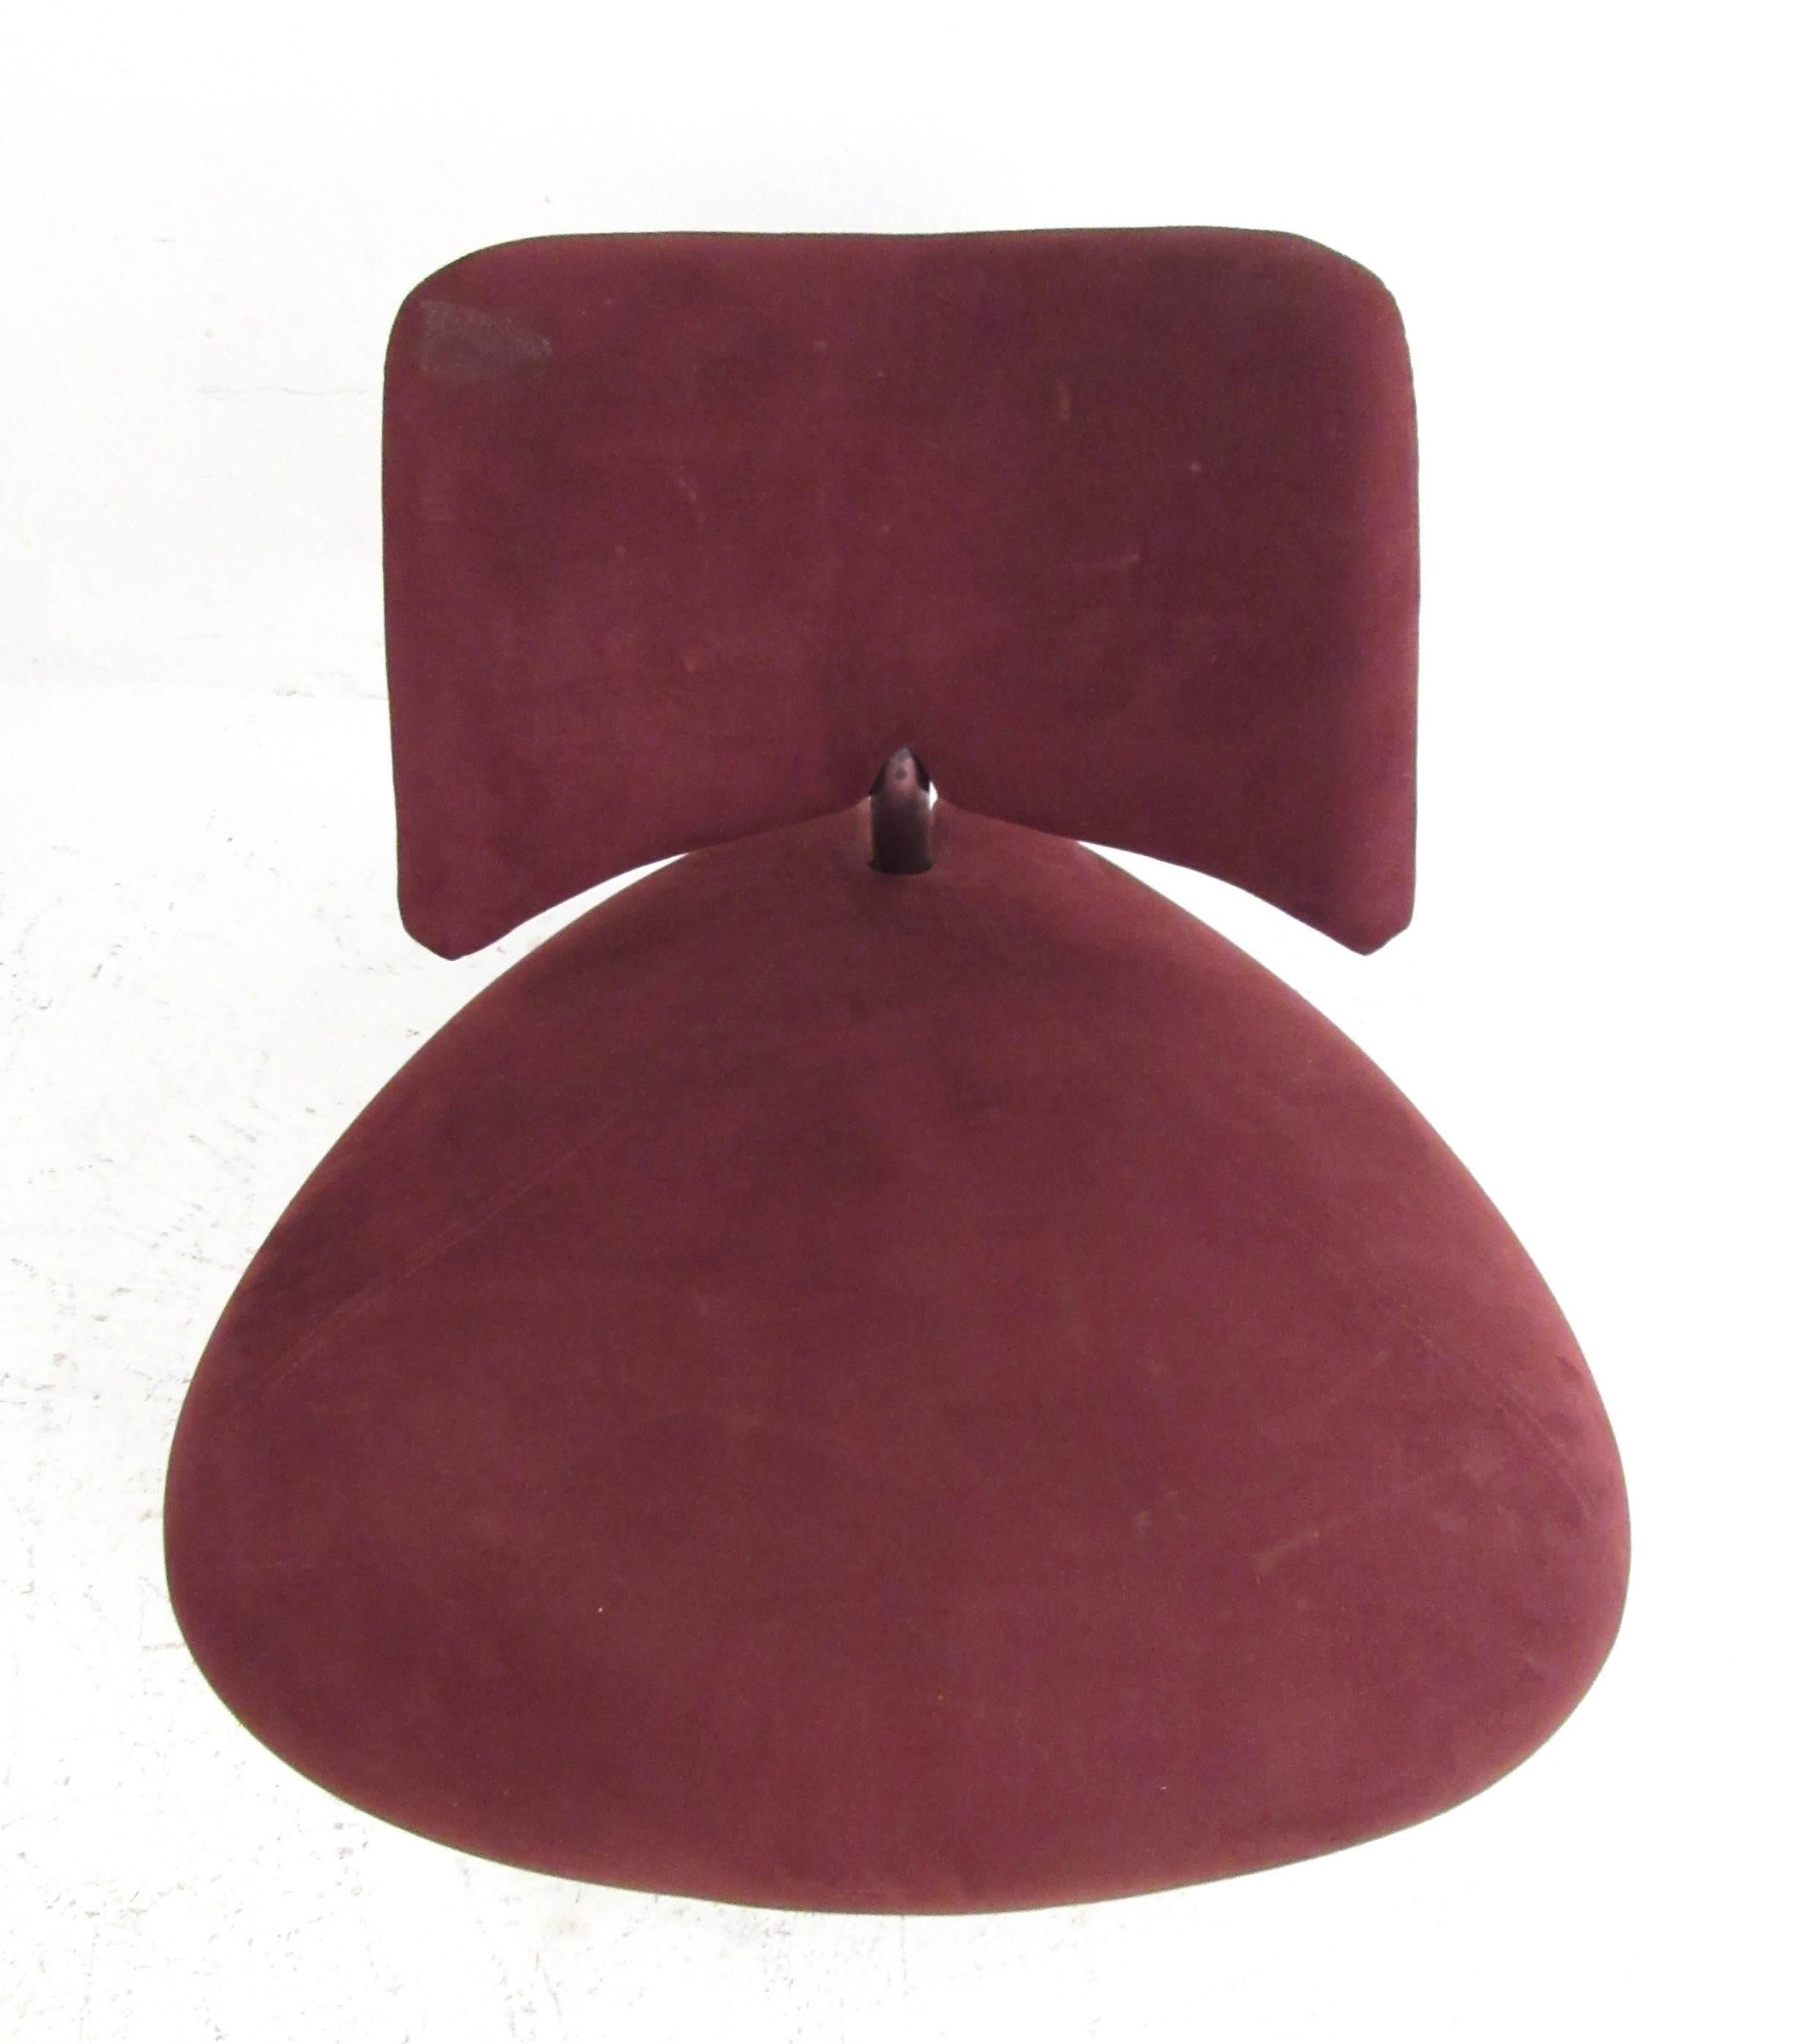 This unique modern slipper chair features maroon suede covering with a unique sculpted seat and seat back. The perfect mix of modern style and incredible comfort, this Roy de Scheemaker design for Leolux (c. 1989) makes a fantastic visual impression